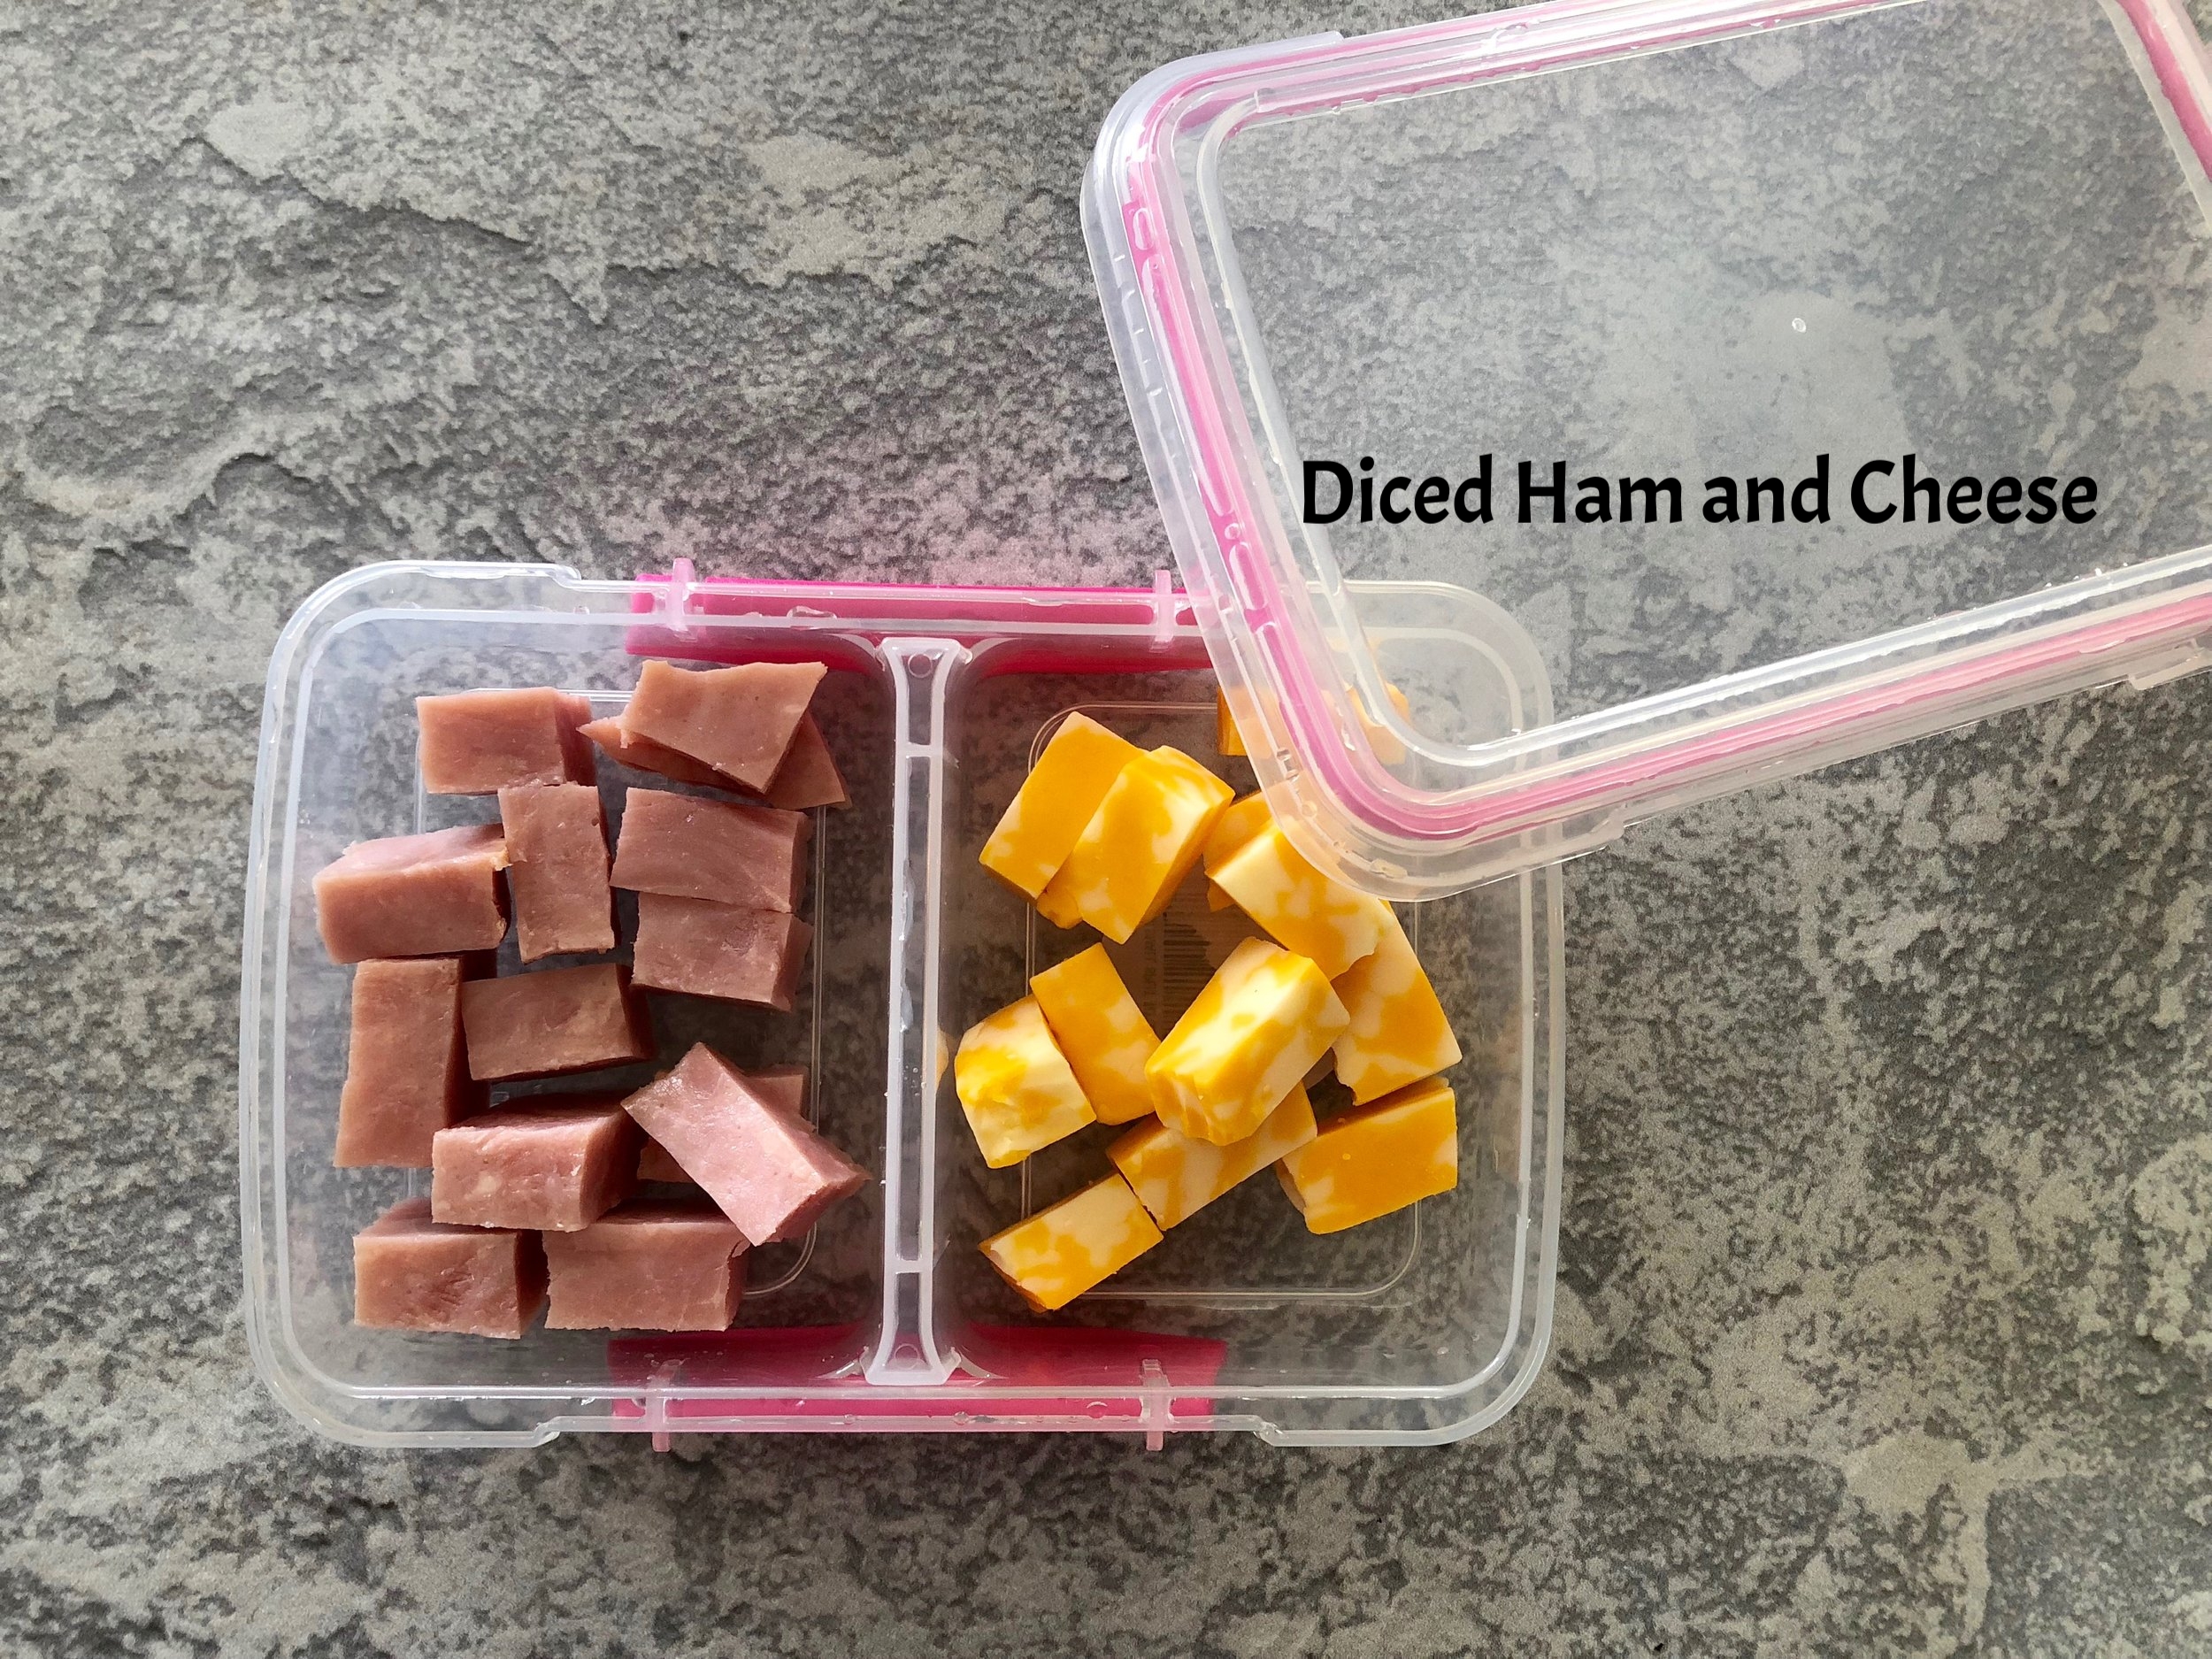 Lunch Diced Ham and Cheese Keto and Low Carb.jpg